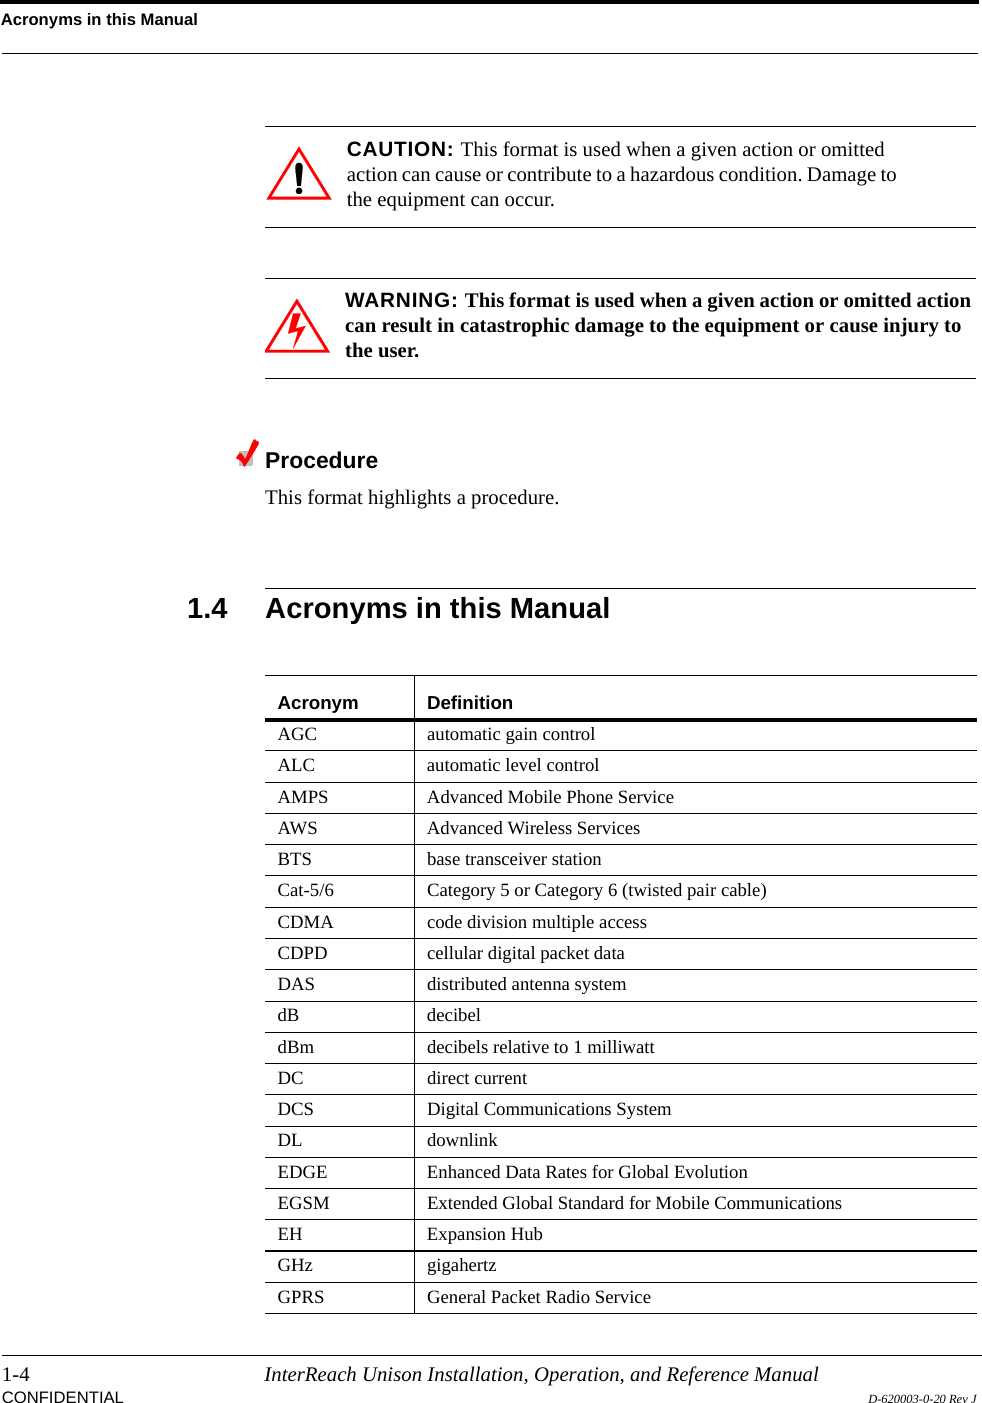 Acronyms in this Manual1-4 InterReach Unison Installation, Operation, and Reference ManualCONFIDENTIAL D-620003-0-20 Rev JCAUTION: This format is used when a given action or omitted action can cause or contribute to a hazardous condition. Damage to the equipment can occur.WARNING: This format is used when a given action or omitted action can result in catastrophic damage to the equipment or cause injury to the user.ProcedureThis format highlights a procedure.1.4 Acronyms in this ManualAcronym DefinitionAGC automatic gain controlALC automatic level controlAMPS Advanced Mobile Phone Service AWS Advanced Wireless ServicesBTS base transceiver stationCat-5/6 Category 5 or Category 6 (twisted pair cable)CDMA code division multiple accessCDPD cellular digital packet dataDAS distributed antenna systemdB decibeldBm decibels relative to 1 milliwattDC direct currentDCS Digital Communications SystemDL downlinkEDGE Enhanced Data Rates for Global Evolution EGSM Extended Global Standard for Mobile CommunicationsEH Expansion HubGHz gigahertzGPRS General Packet Radio Service 